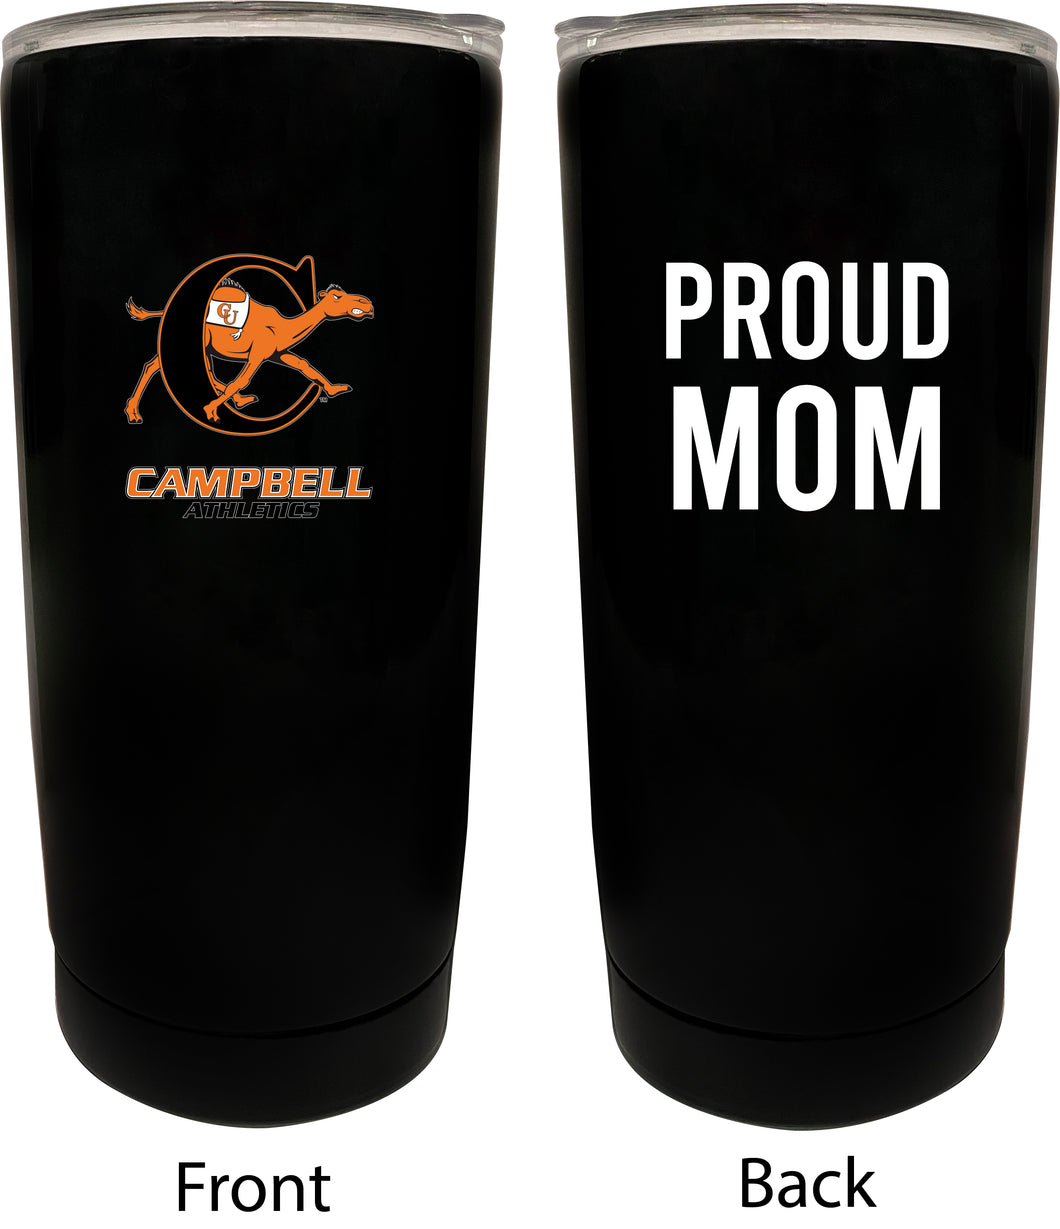 Campbell University Fighting Camels NCAA Insulated Tumbler - 16oz Stainless Steel Travel Mug Proud Mom Design Black